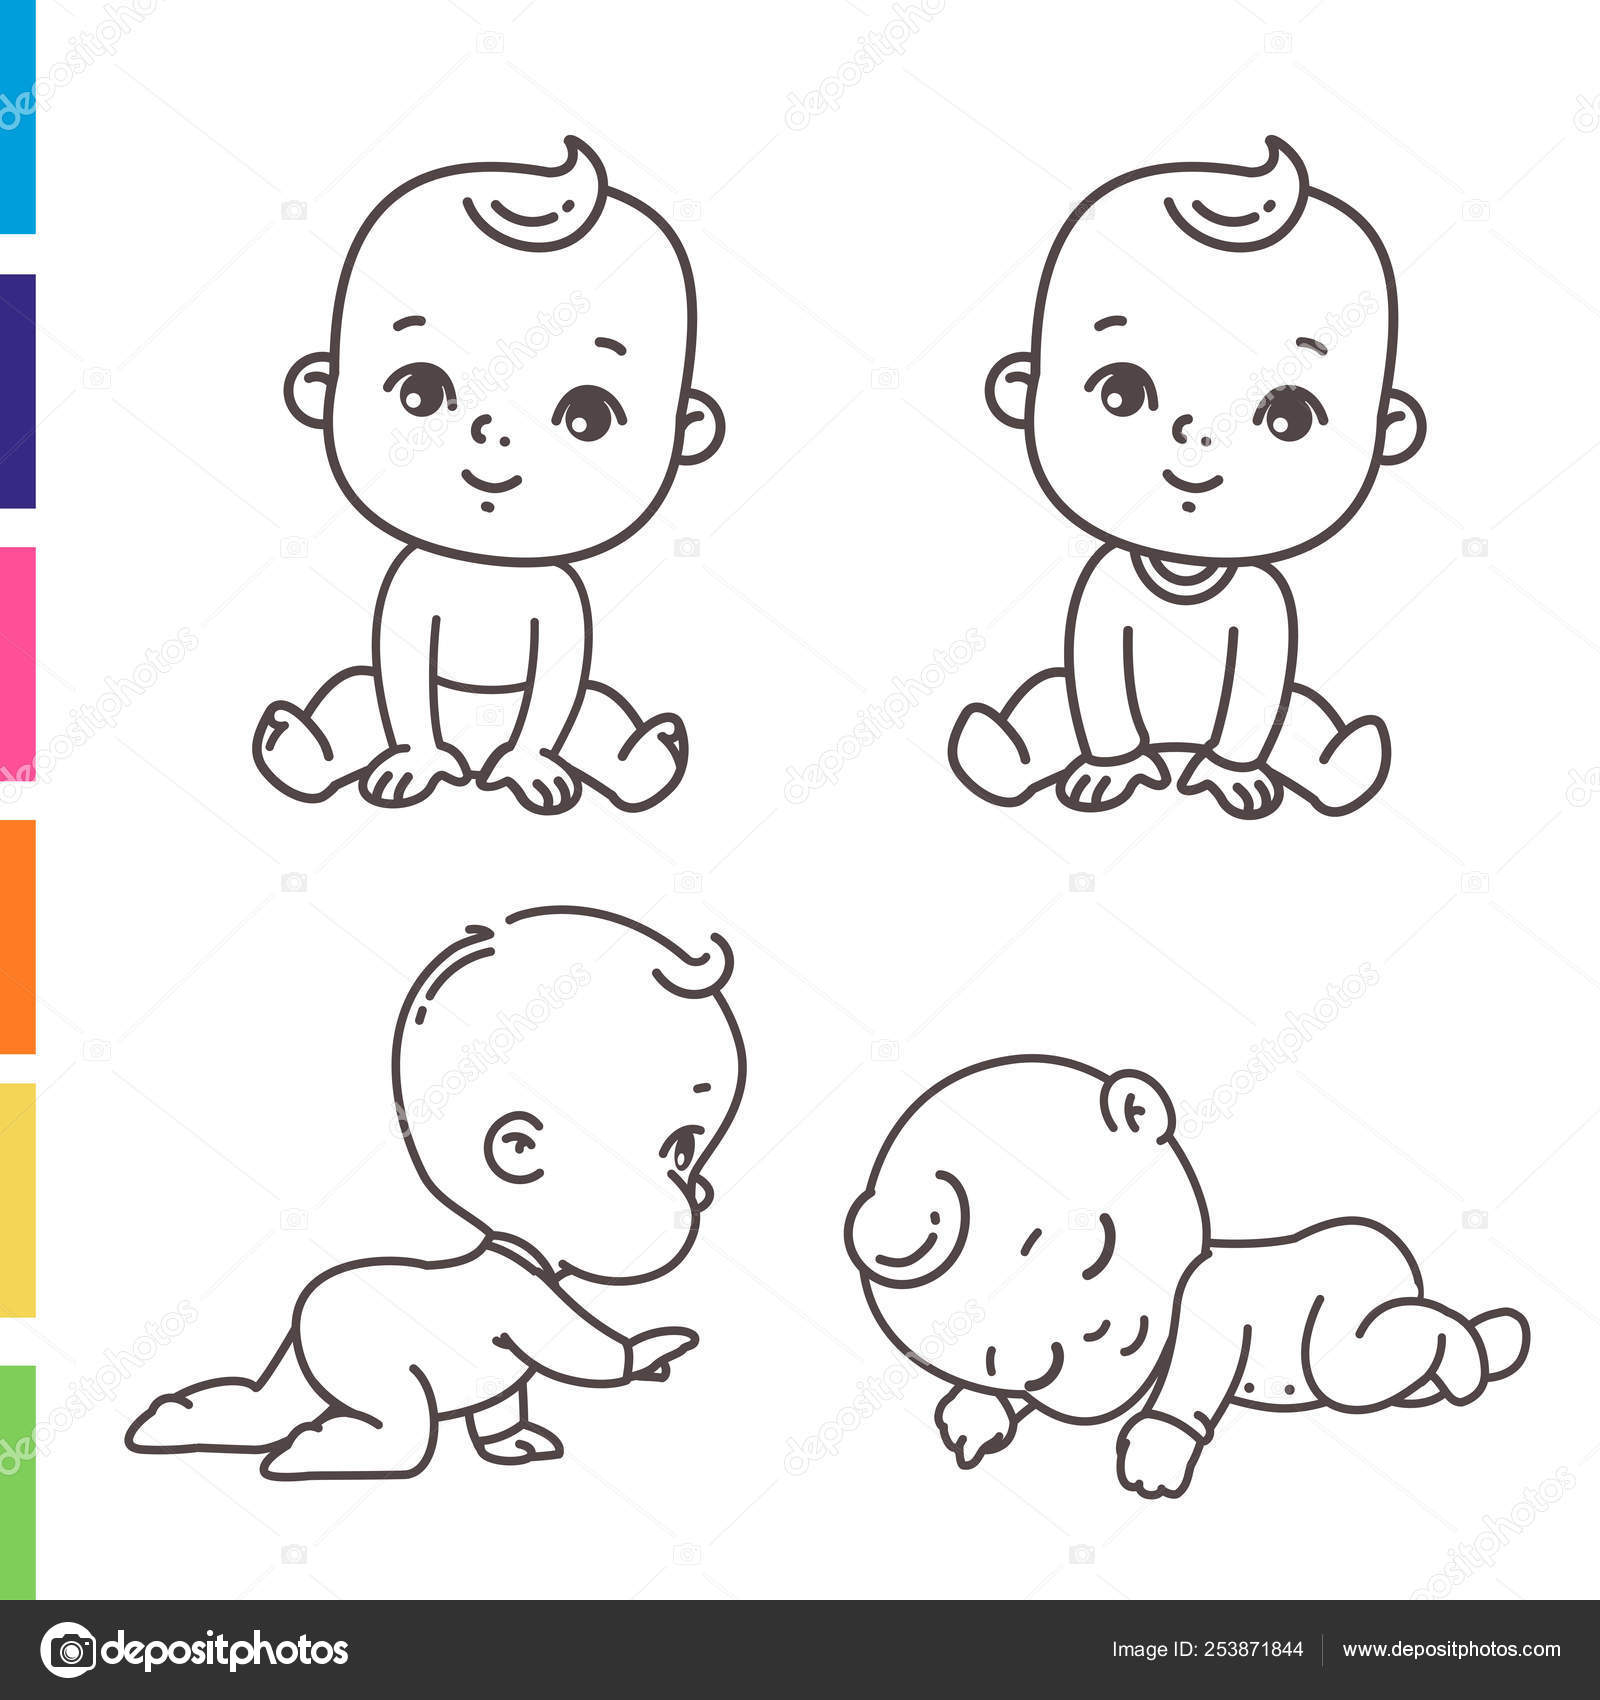 Cute little boy icon set. Coloring page of outline stickers of little baby  boy in pajamas, diaper. Child sleeping, sitting, crawling. Emblem of kid